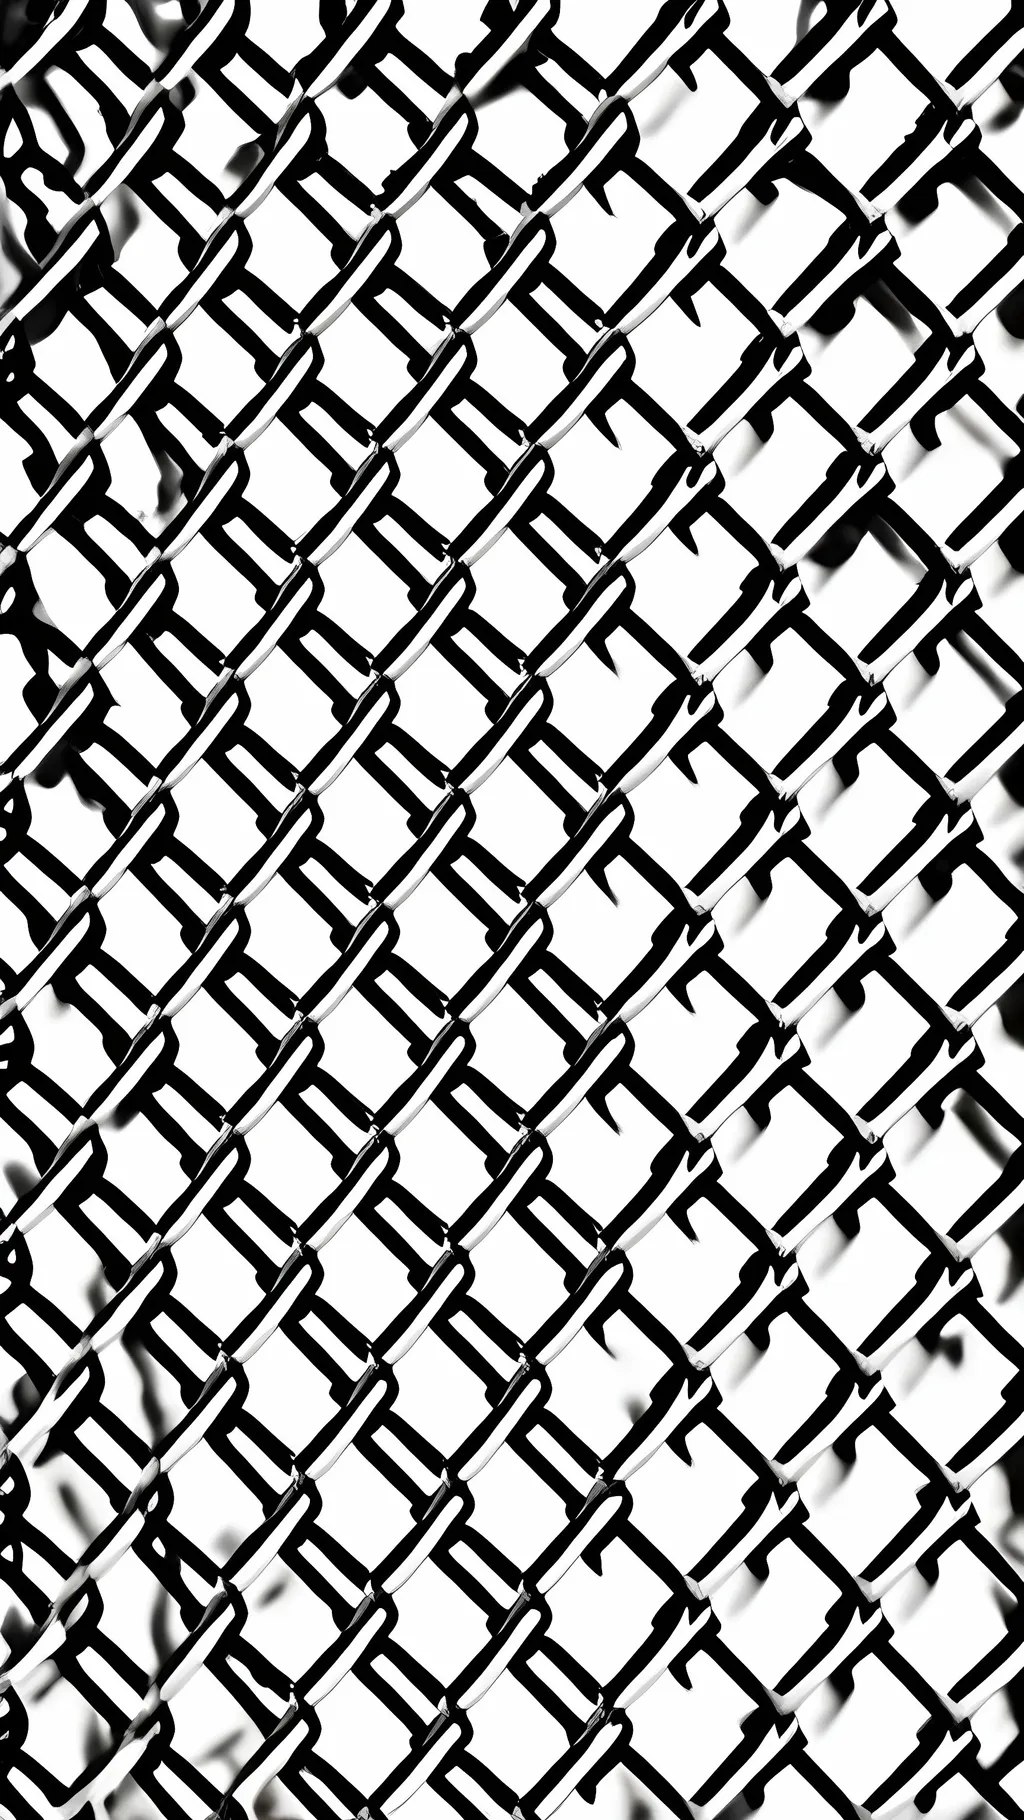 Prompt: Create a manga style black and white image of chain link fence and checkered pattern. 